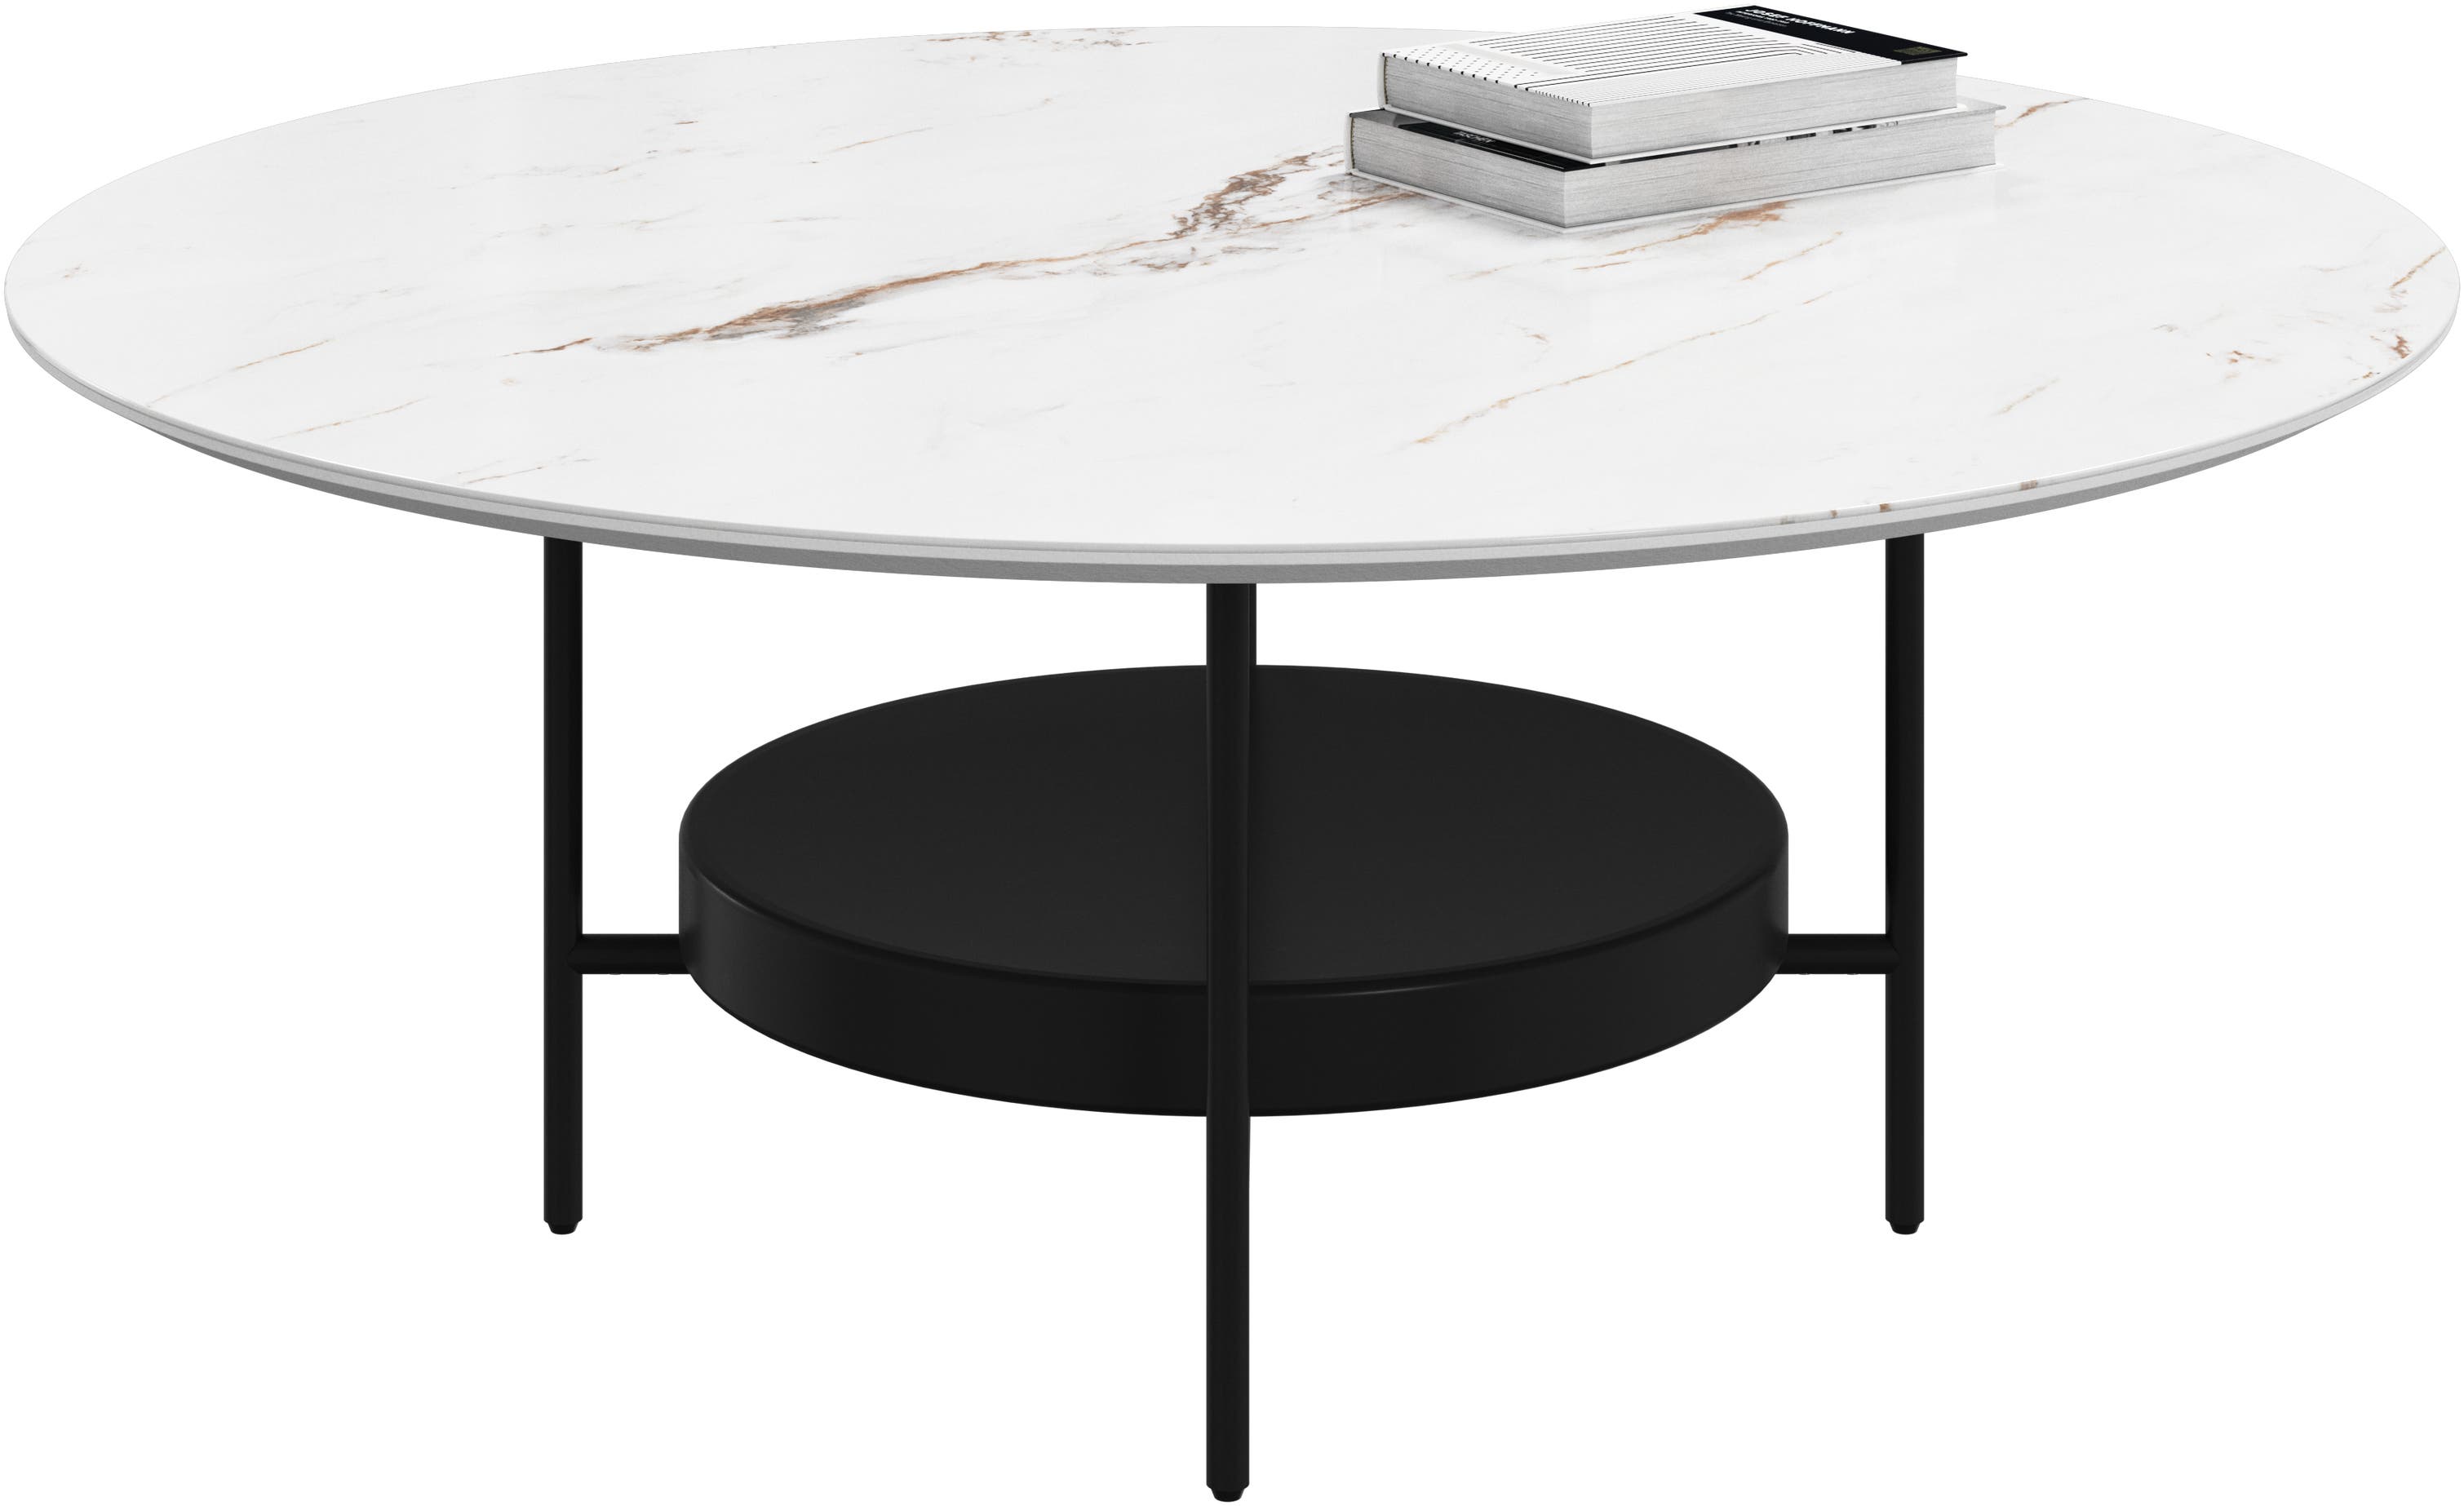 Designer coffee tables | See all our designs | BoConcept